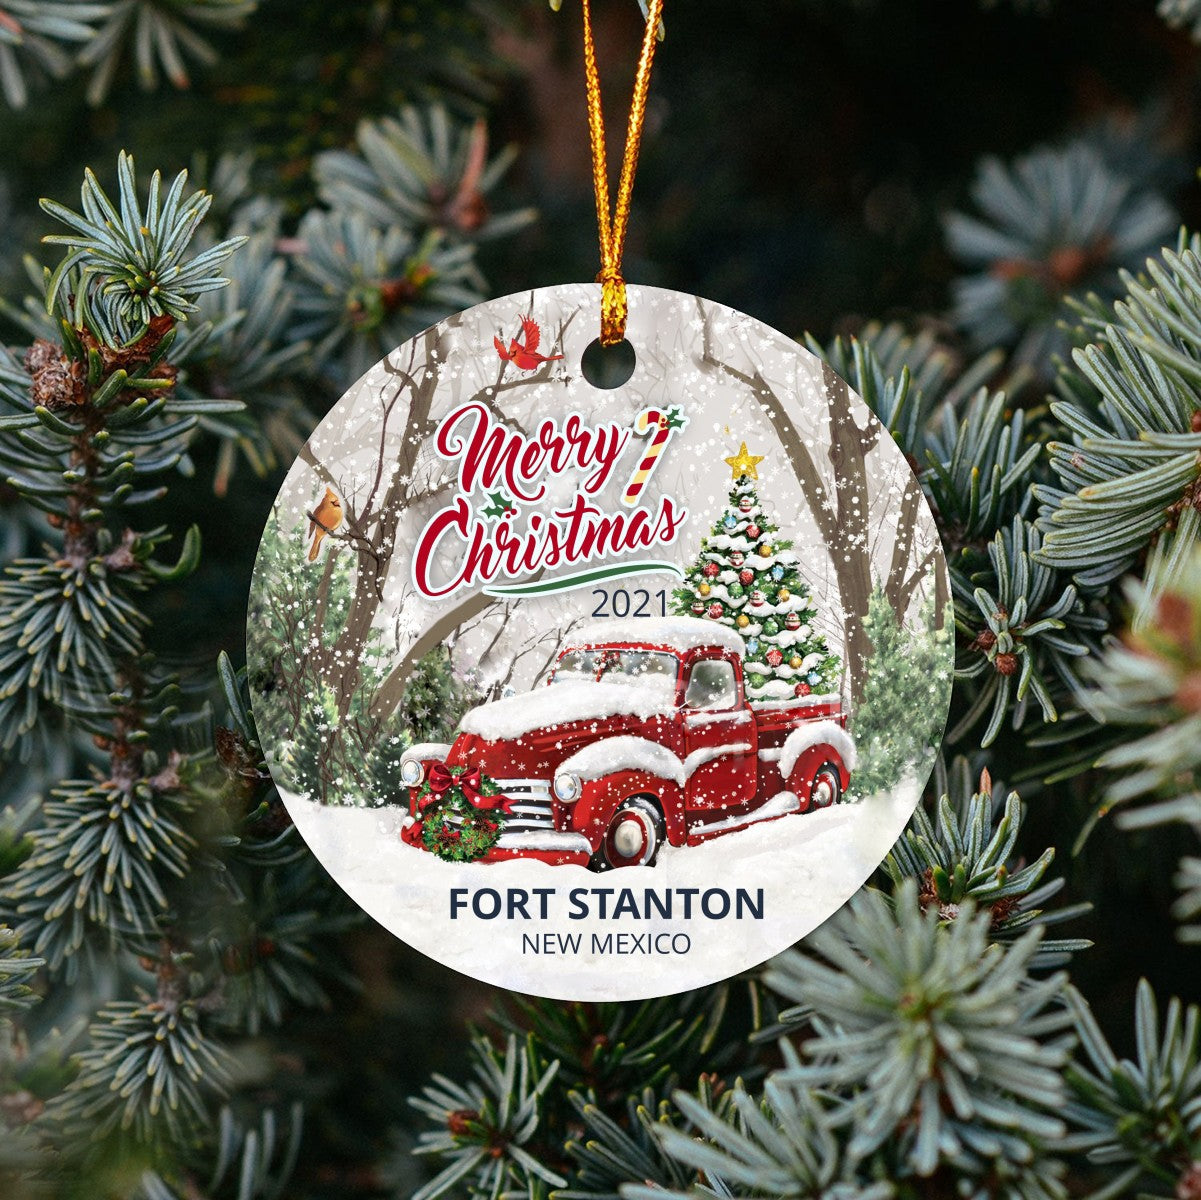 Christmas Tree Ornaments Fort Stanton - Ornament With Name City, State Fort Stanton New Mexico NM Ornament - Red Truck Xmas Ornaments 3'' Plastic Gift For Family, Friend And Housewarming